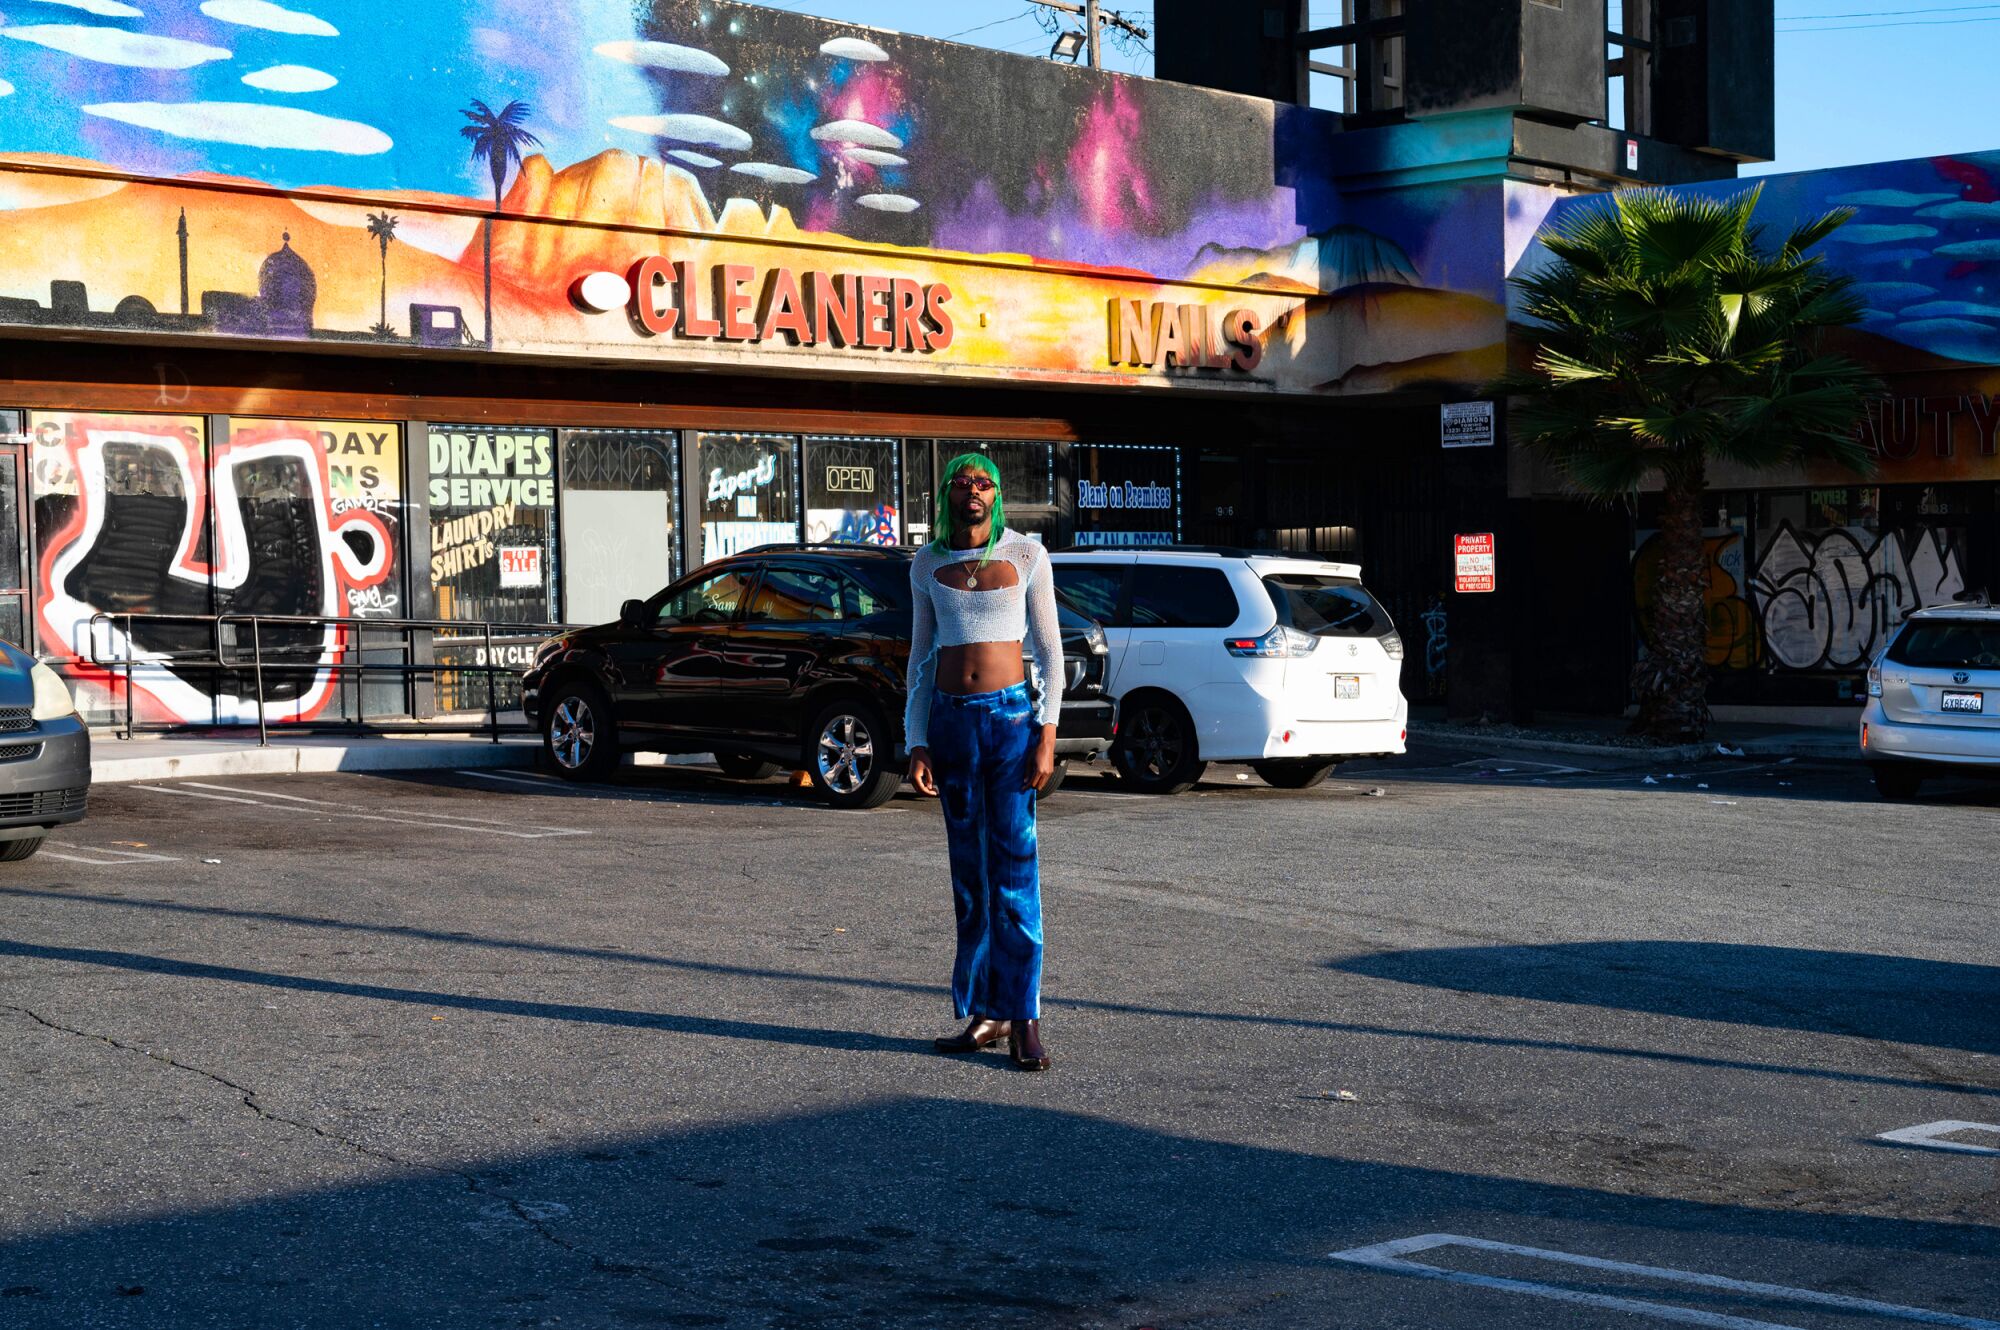 A person stands in the parking lot of a strip mall, with colorful signs reading "Cleaners" and "Nails" in the background.